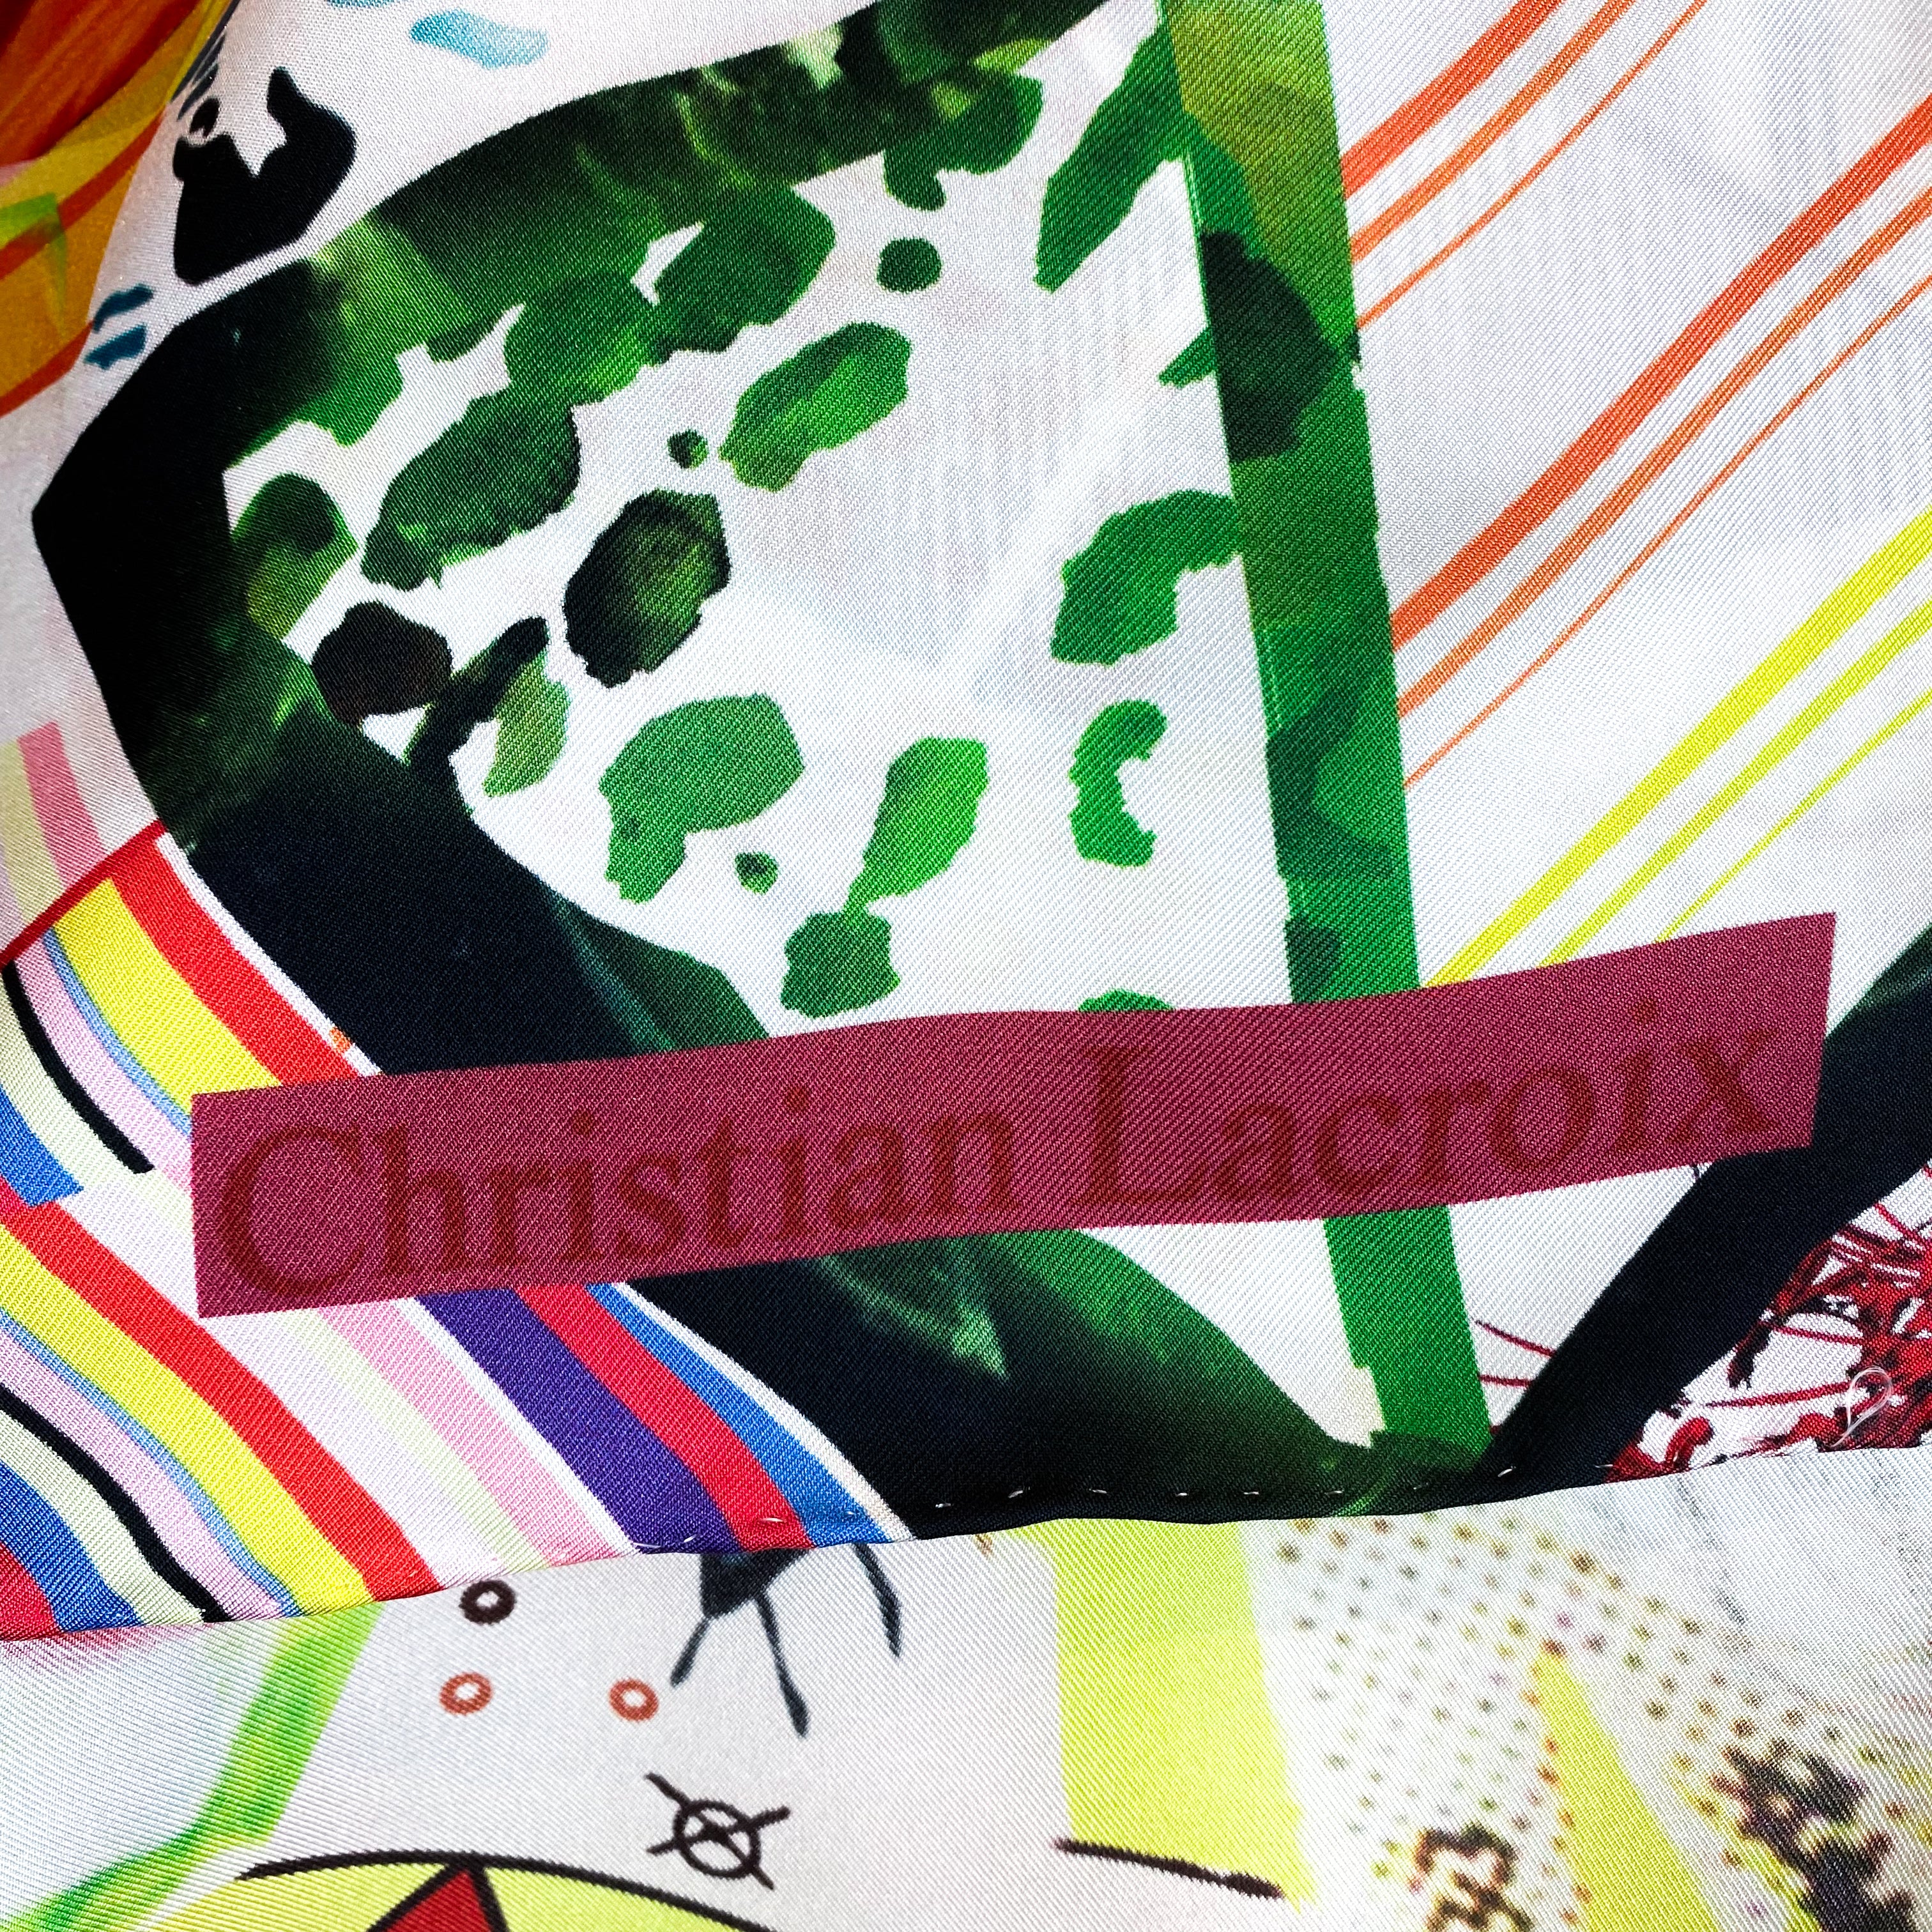 Immaculate Christian Lacroix Silk Scarf